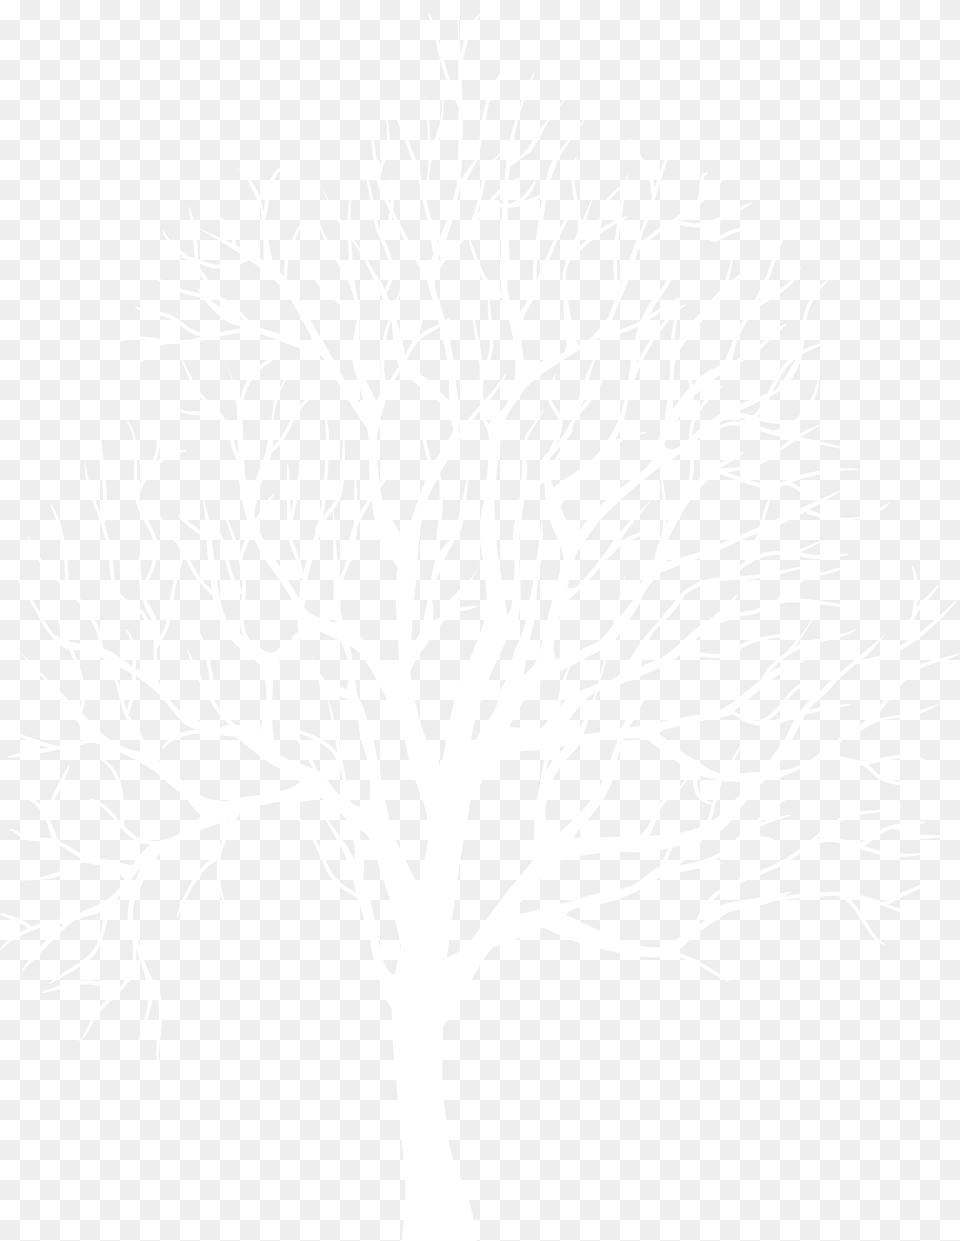 White Tree Silhouette Download White Tree Silhouette Transparent Background, Plant, Art, Drawing Png